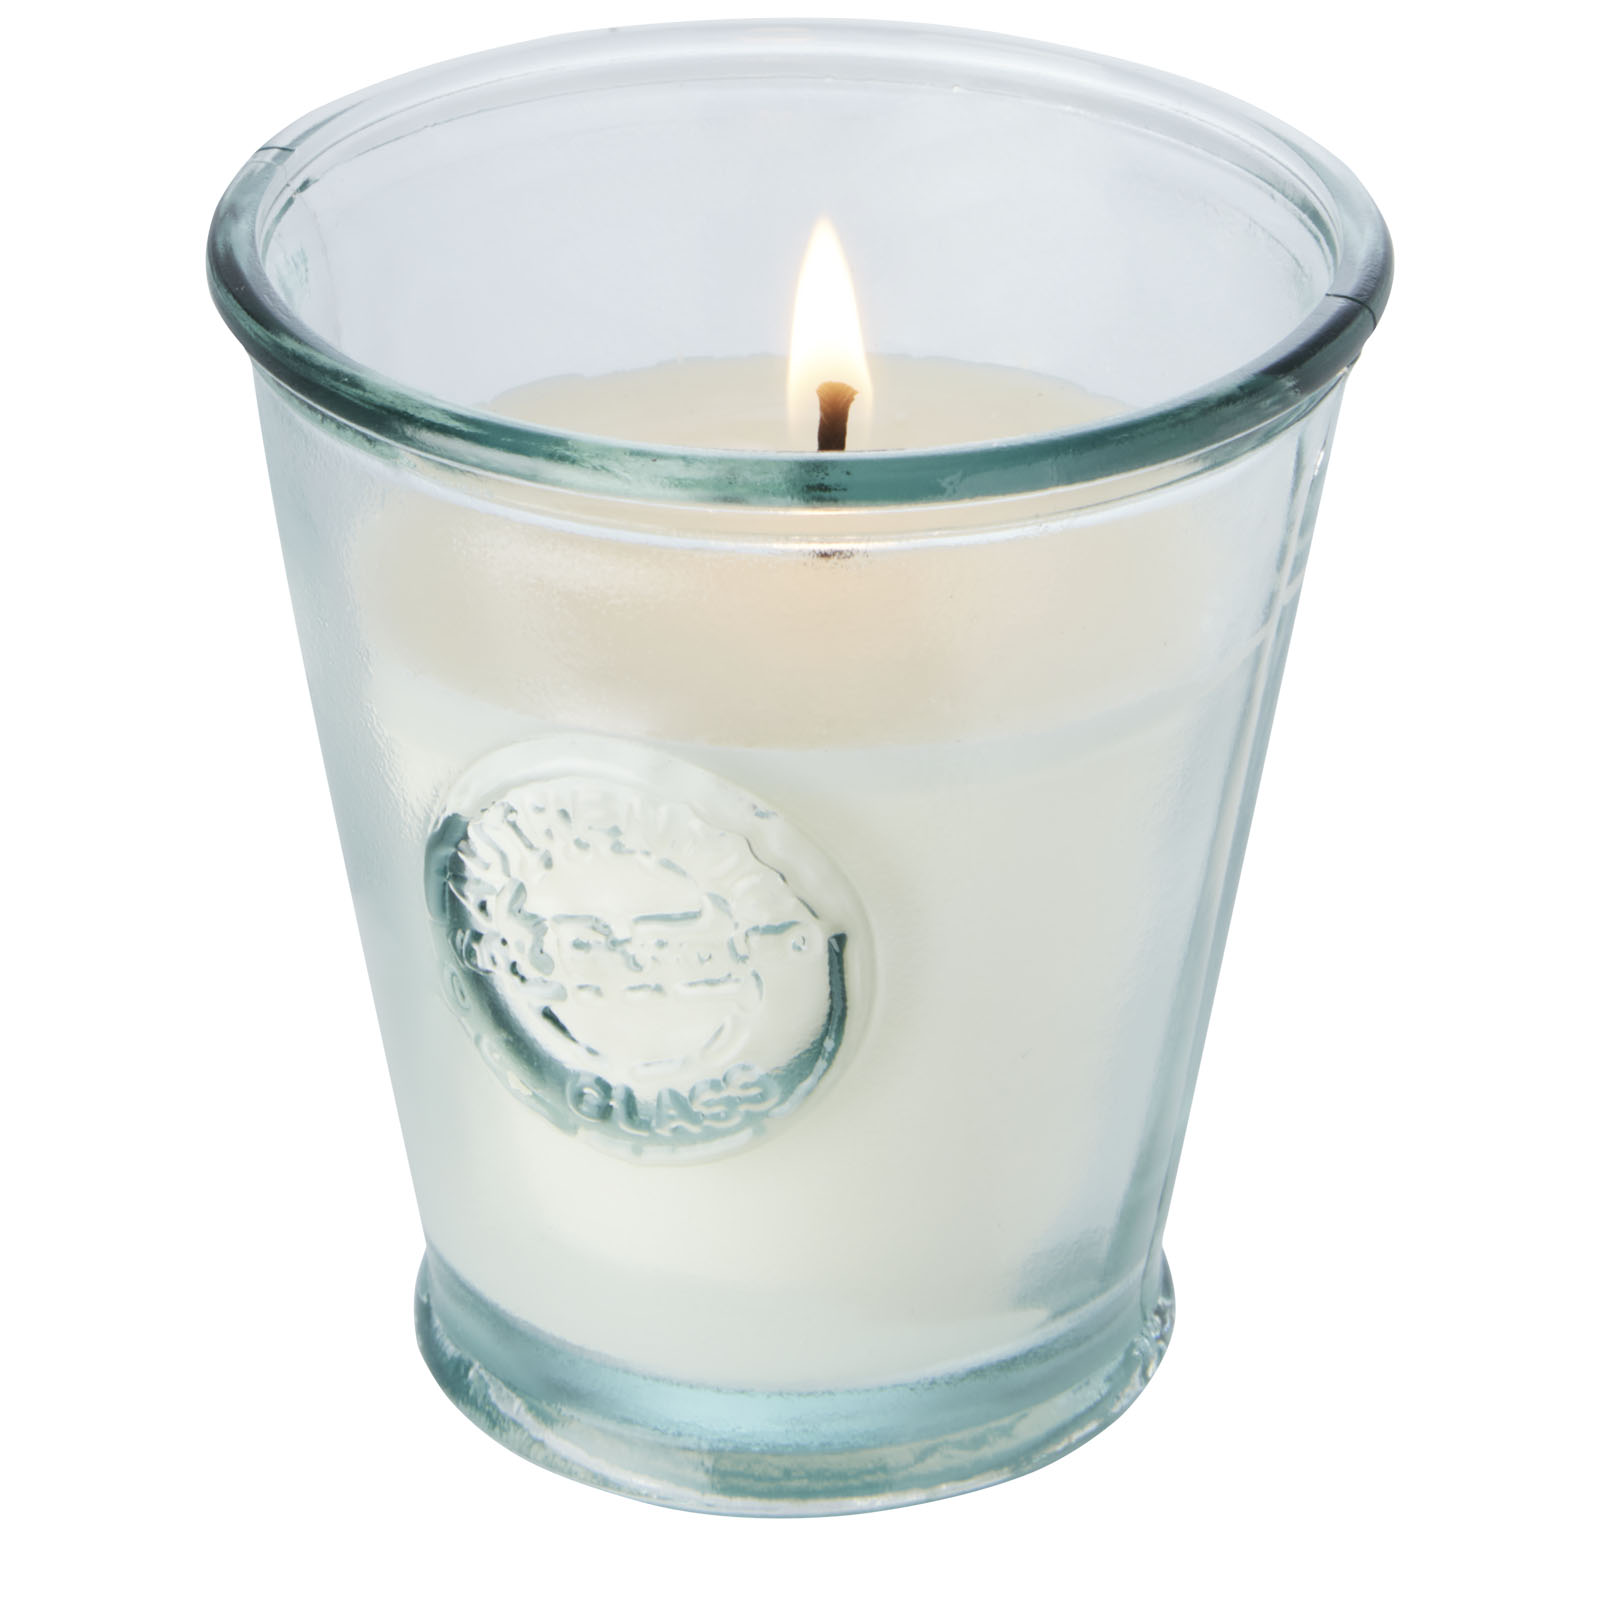 Unscented Soy Wax Candle in Recycled Glass Holder - Gateshead